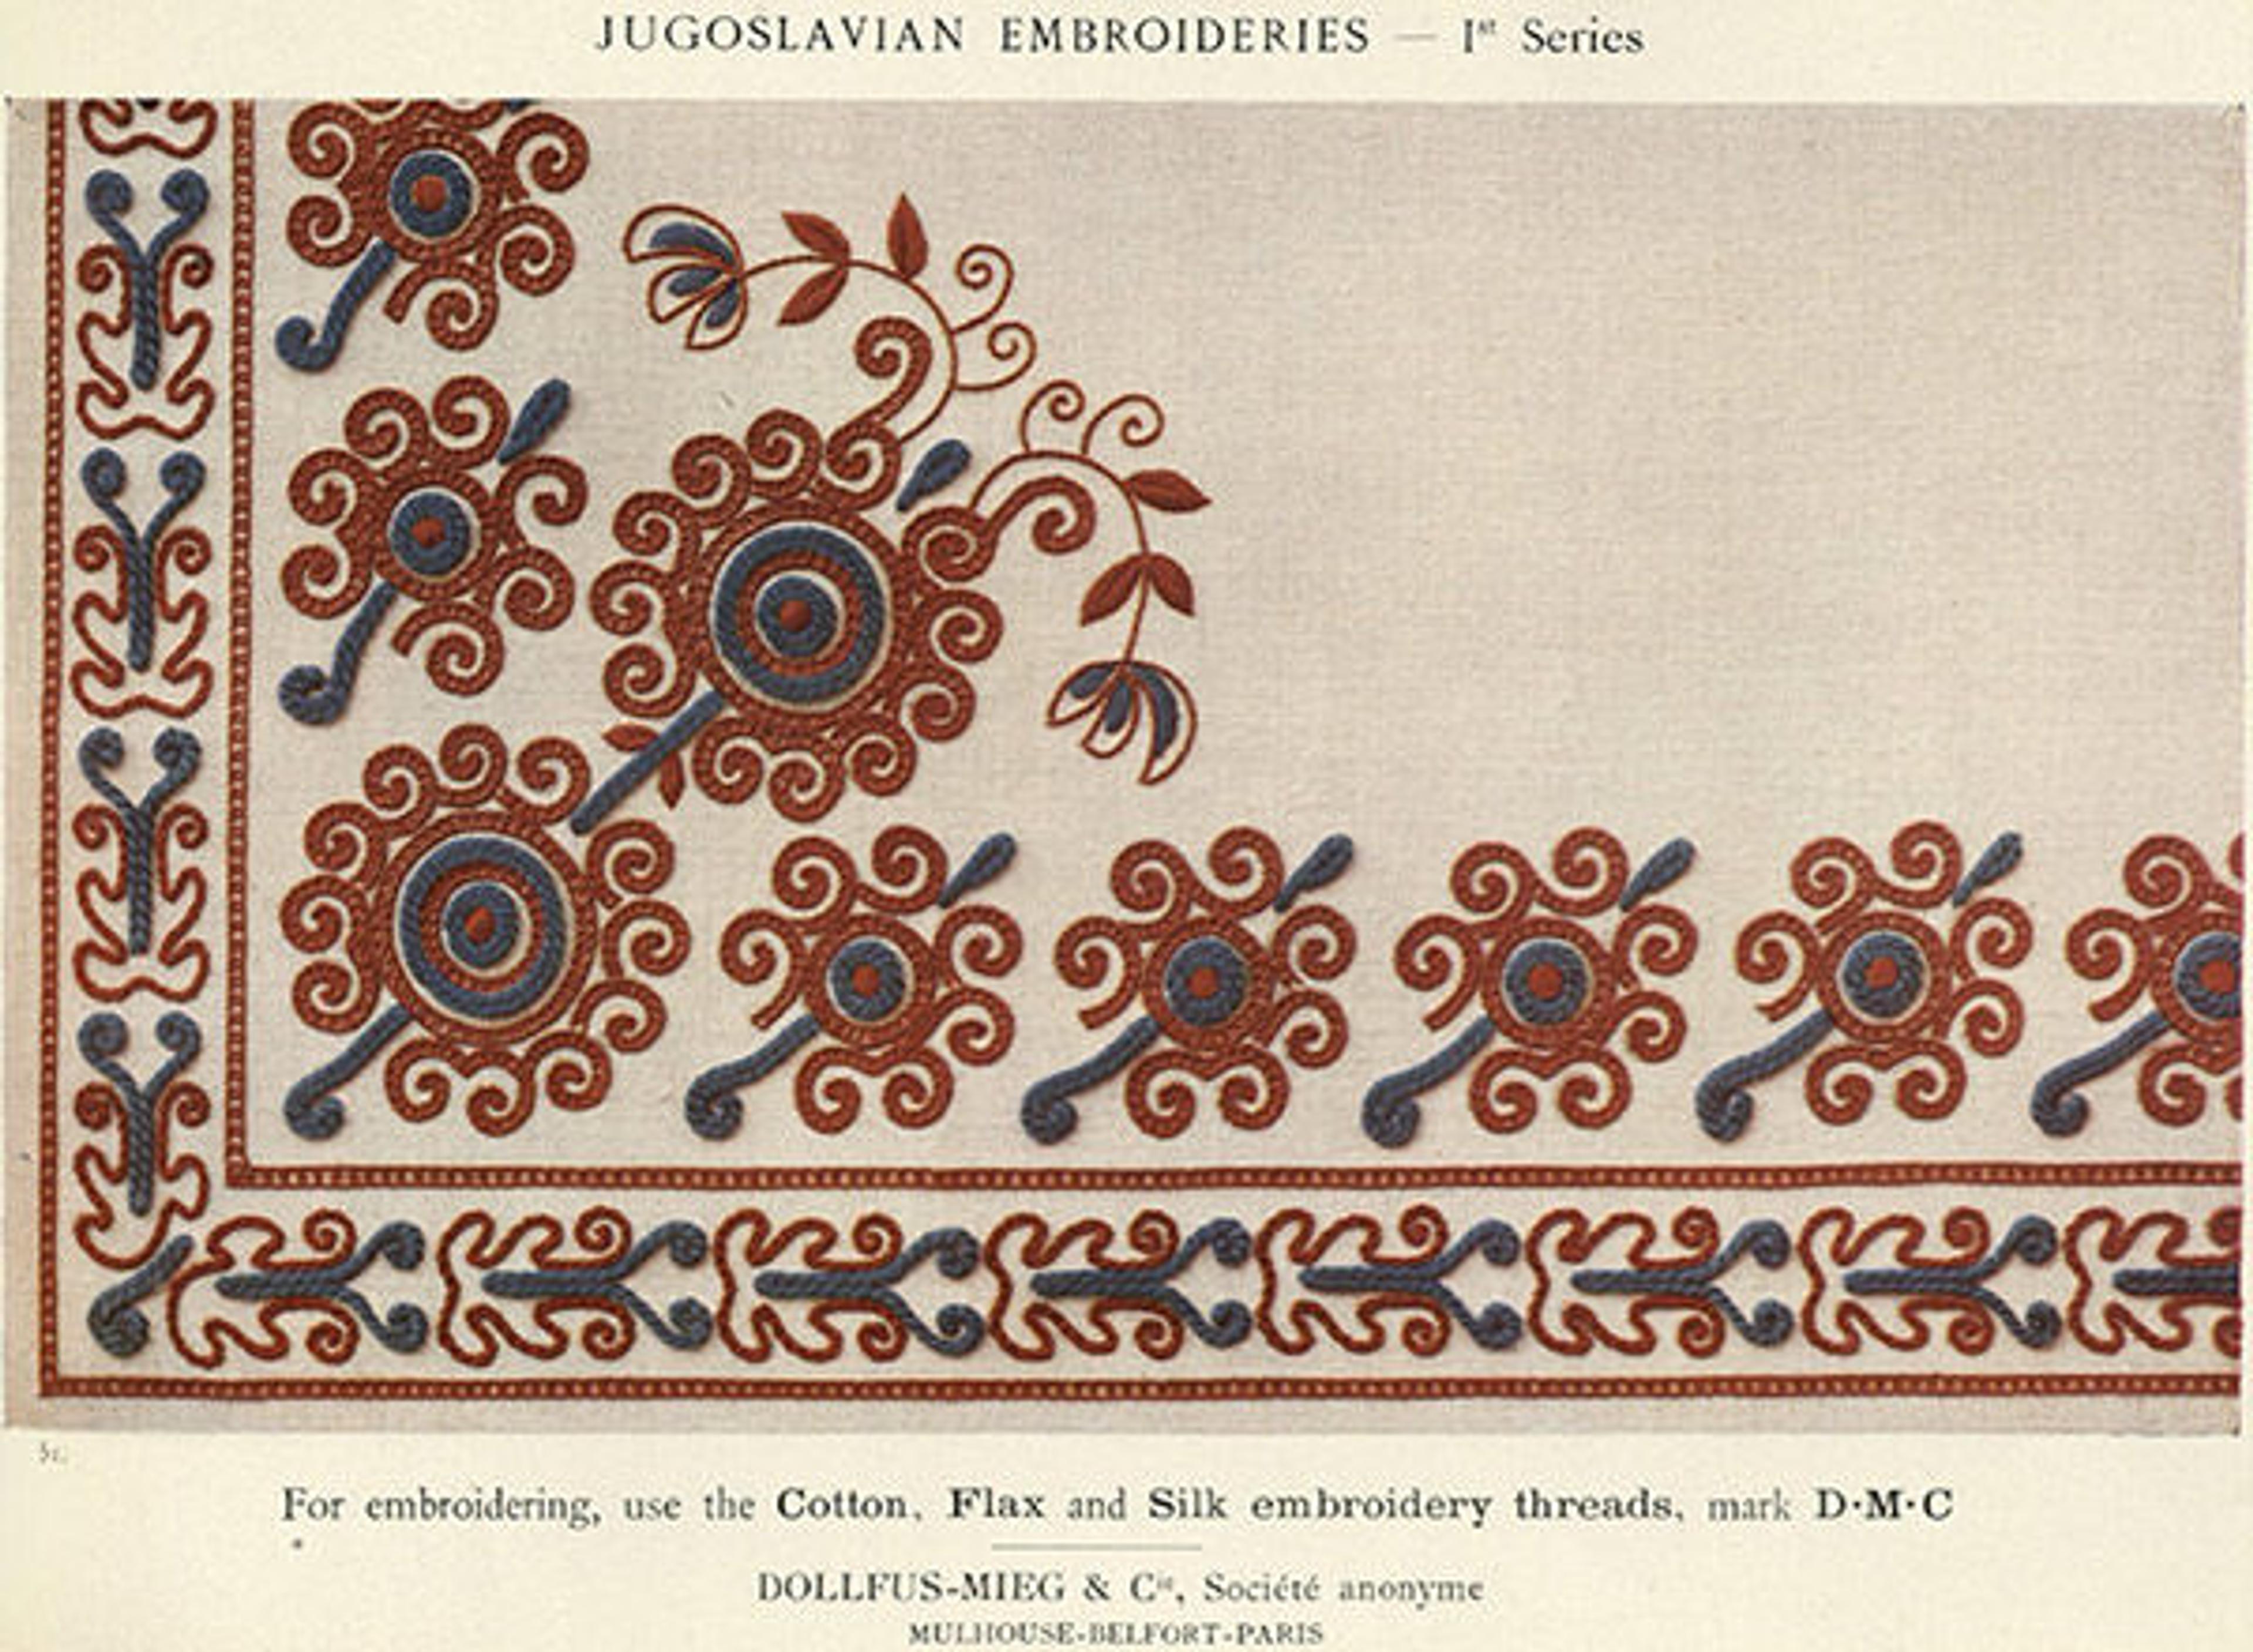 Motifs for embroideries